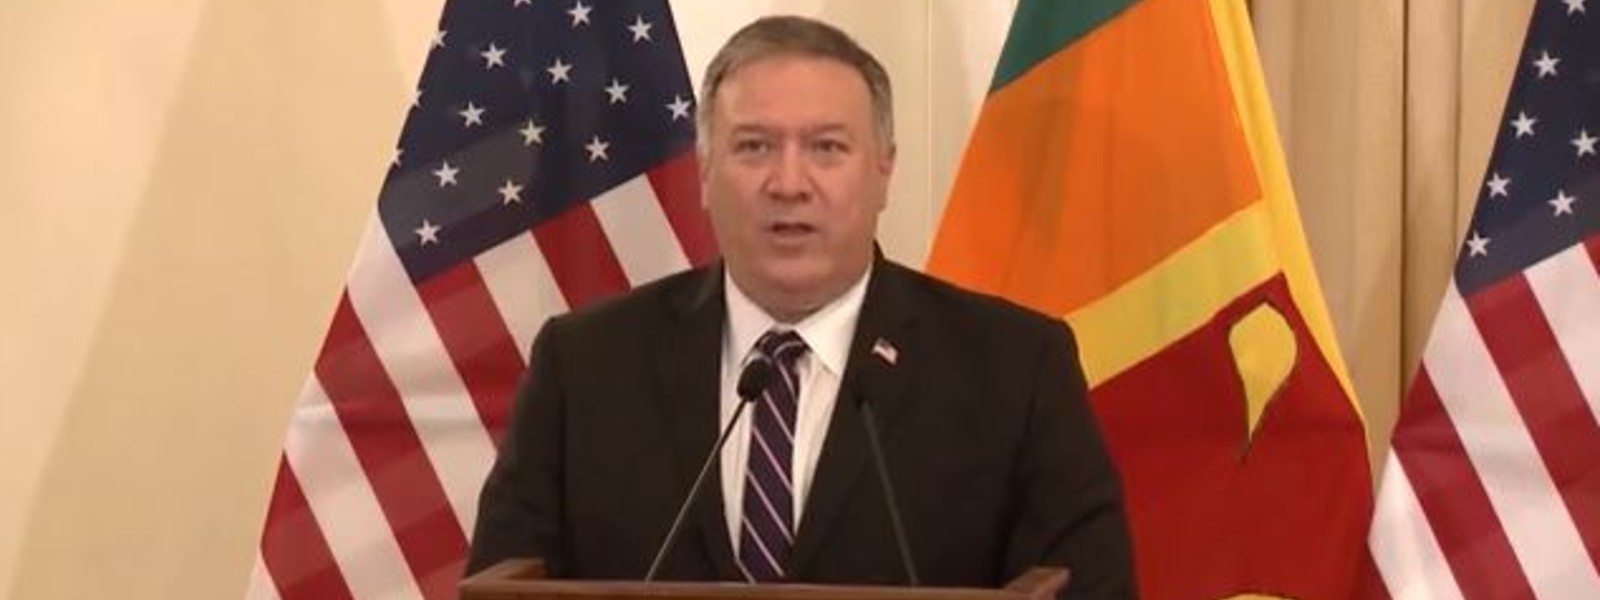 Pompeo calls China ‘Predator’, says US come as a friend and partner (VIDEO)